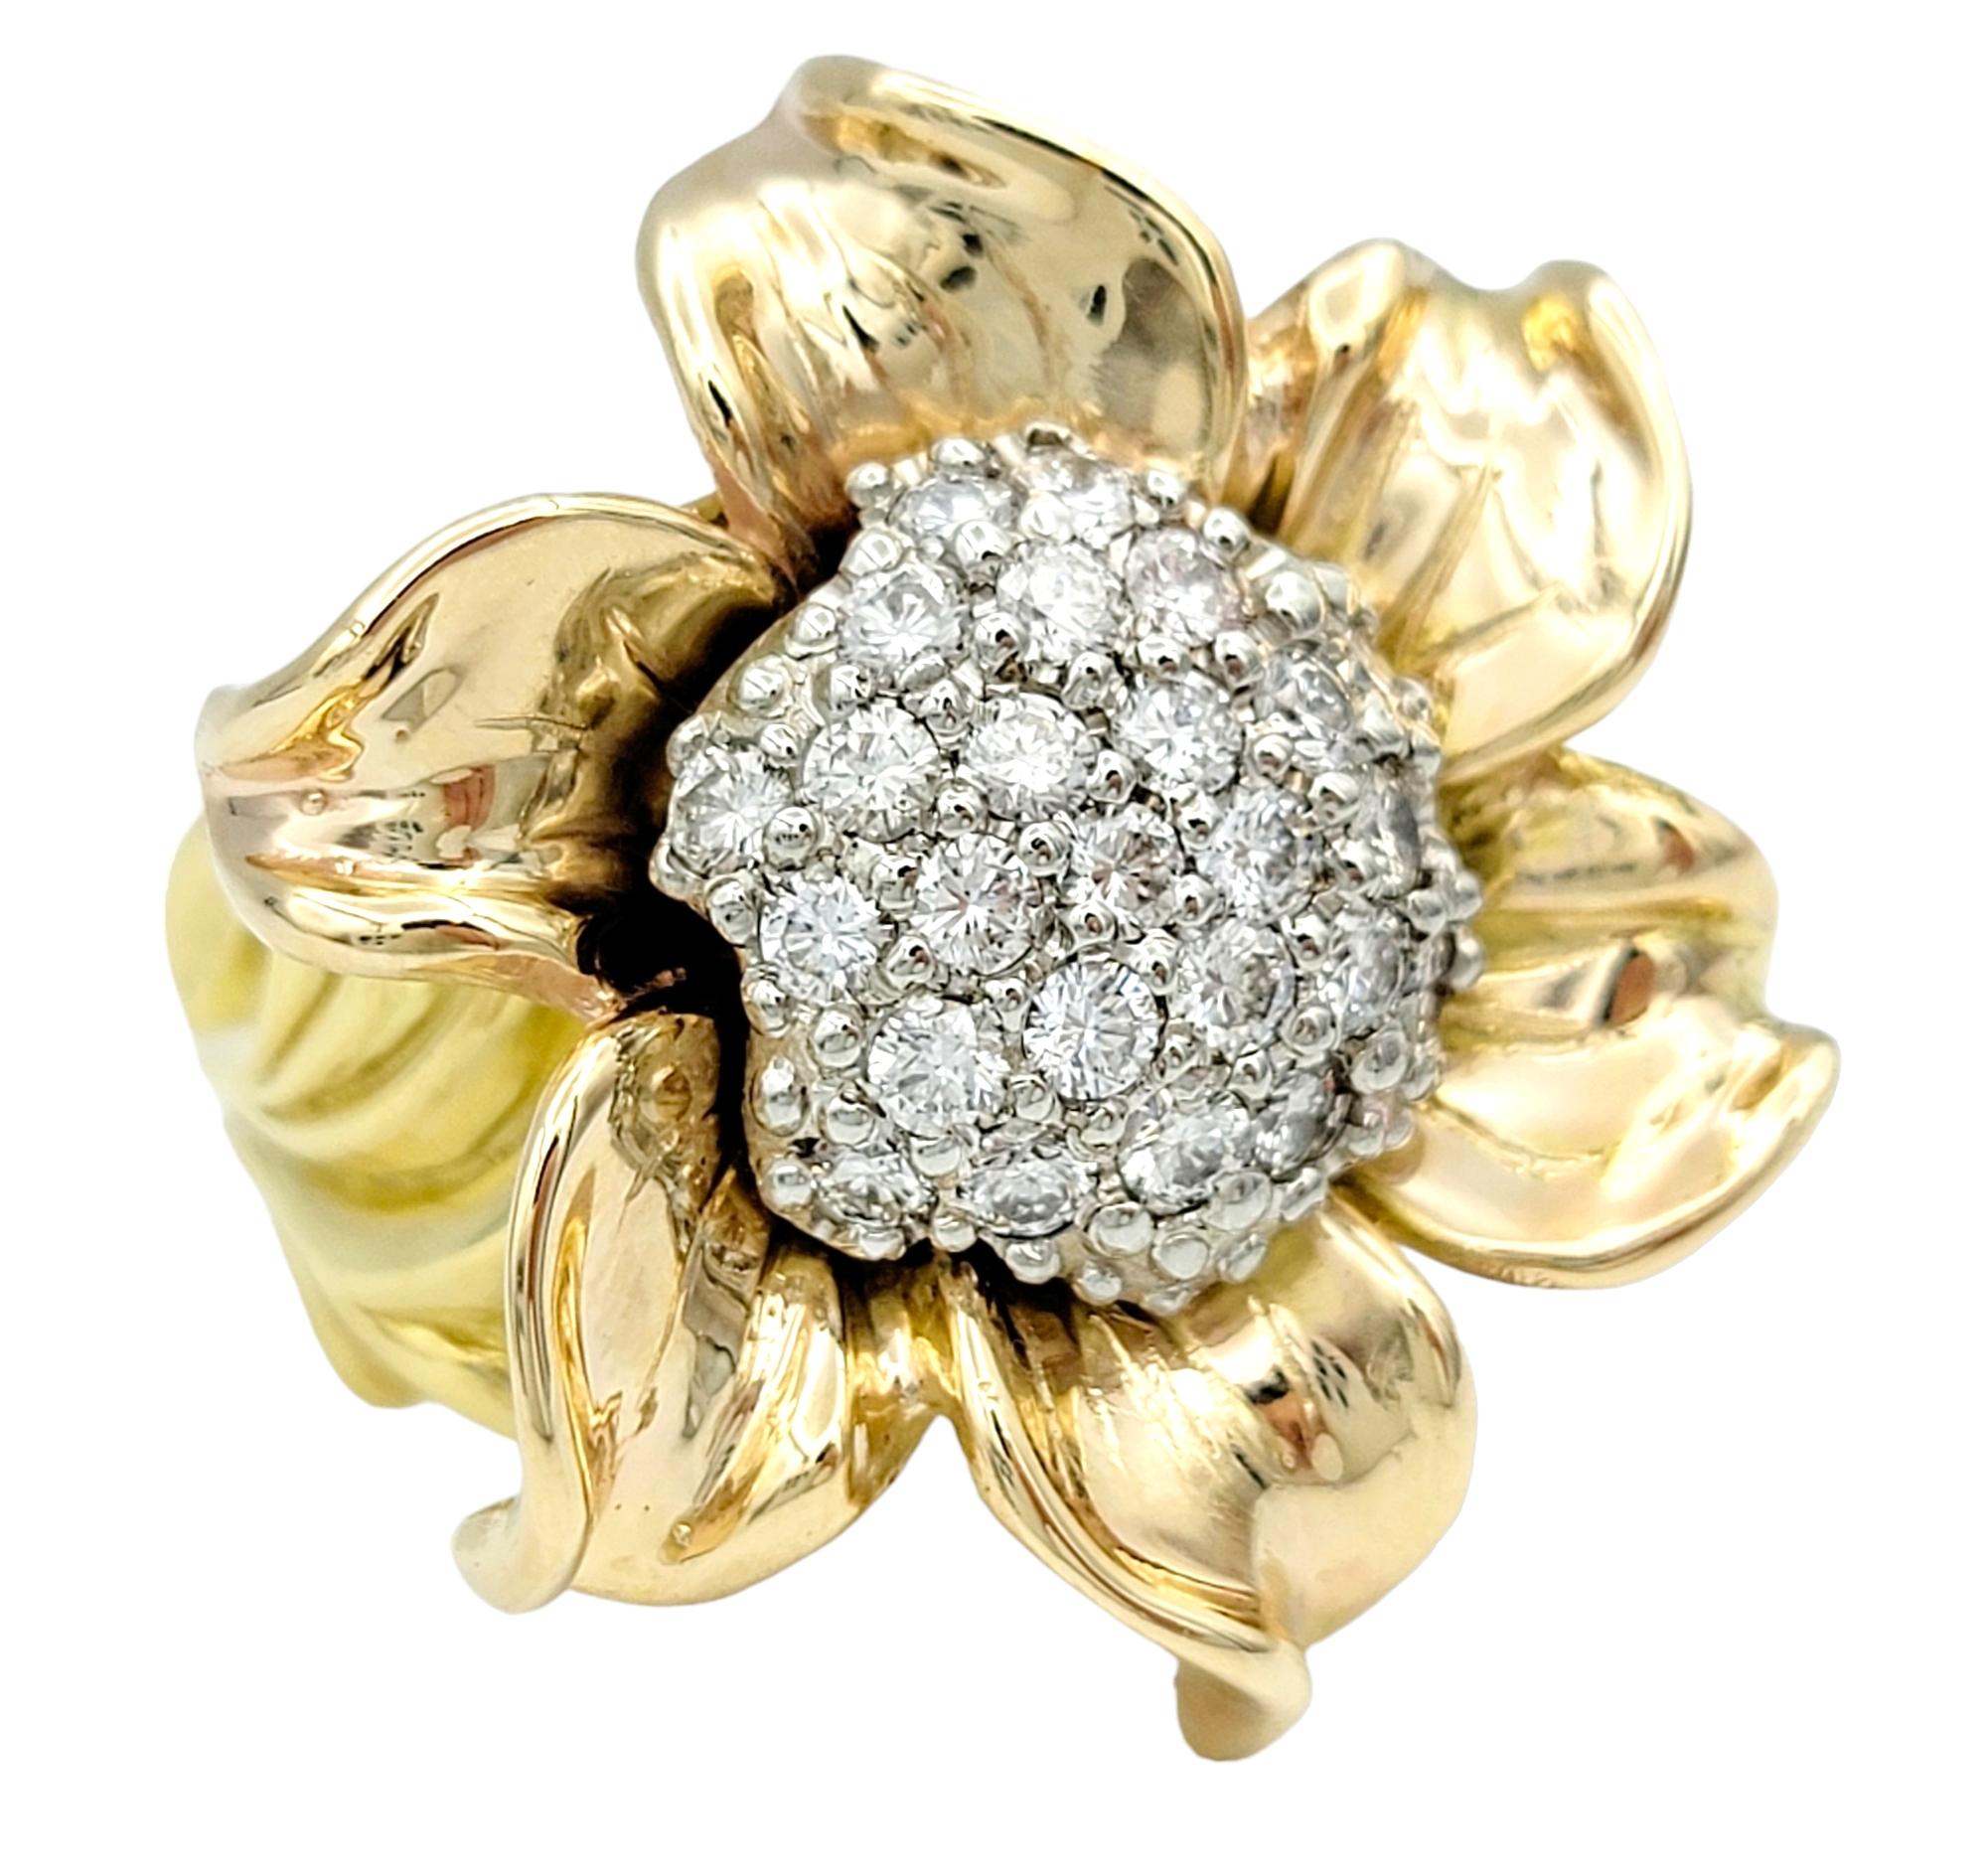 Ring size: 6.75

This captivating statement ring is a magnificent ode to the beauty and intricacies of nature. Crafted with a bold and asymmetrical design, it takes the form of a sunflower, one of nature's most iconic symbols. The sunflower's